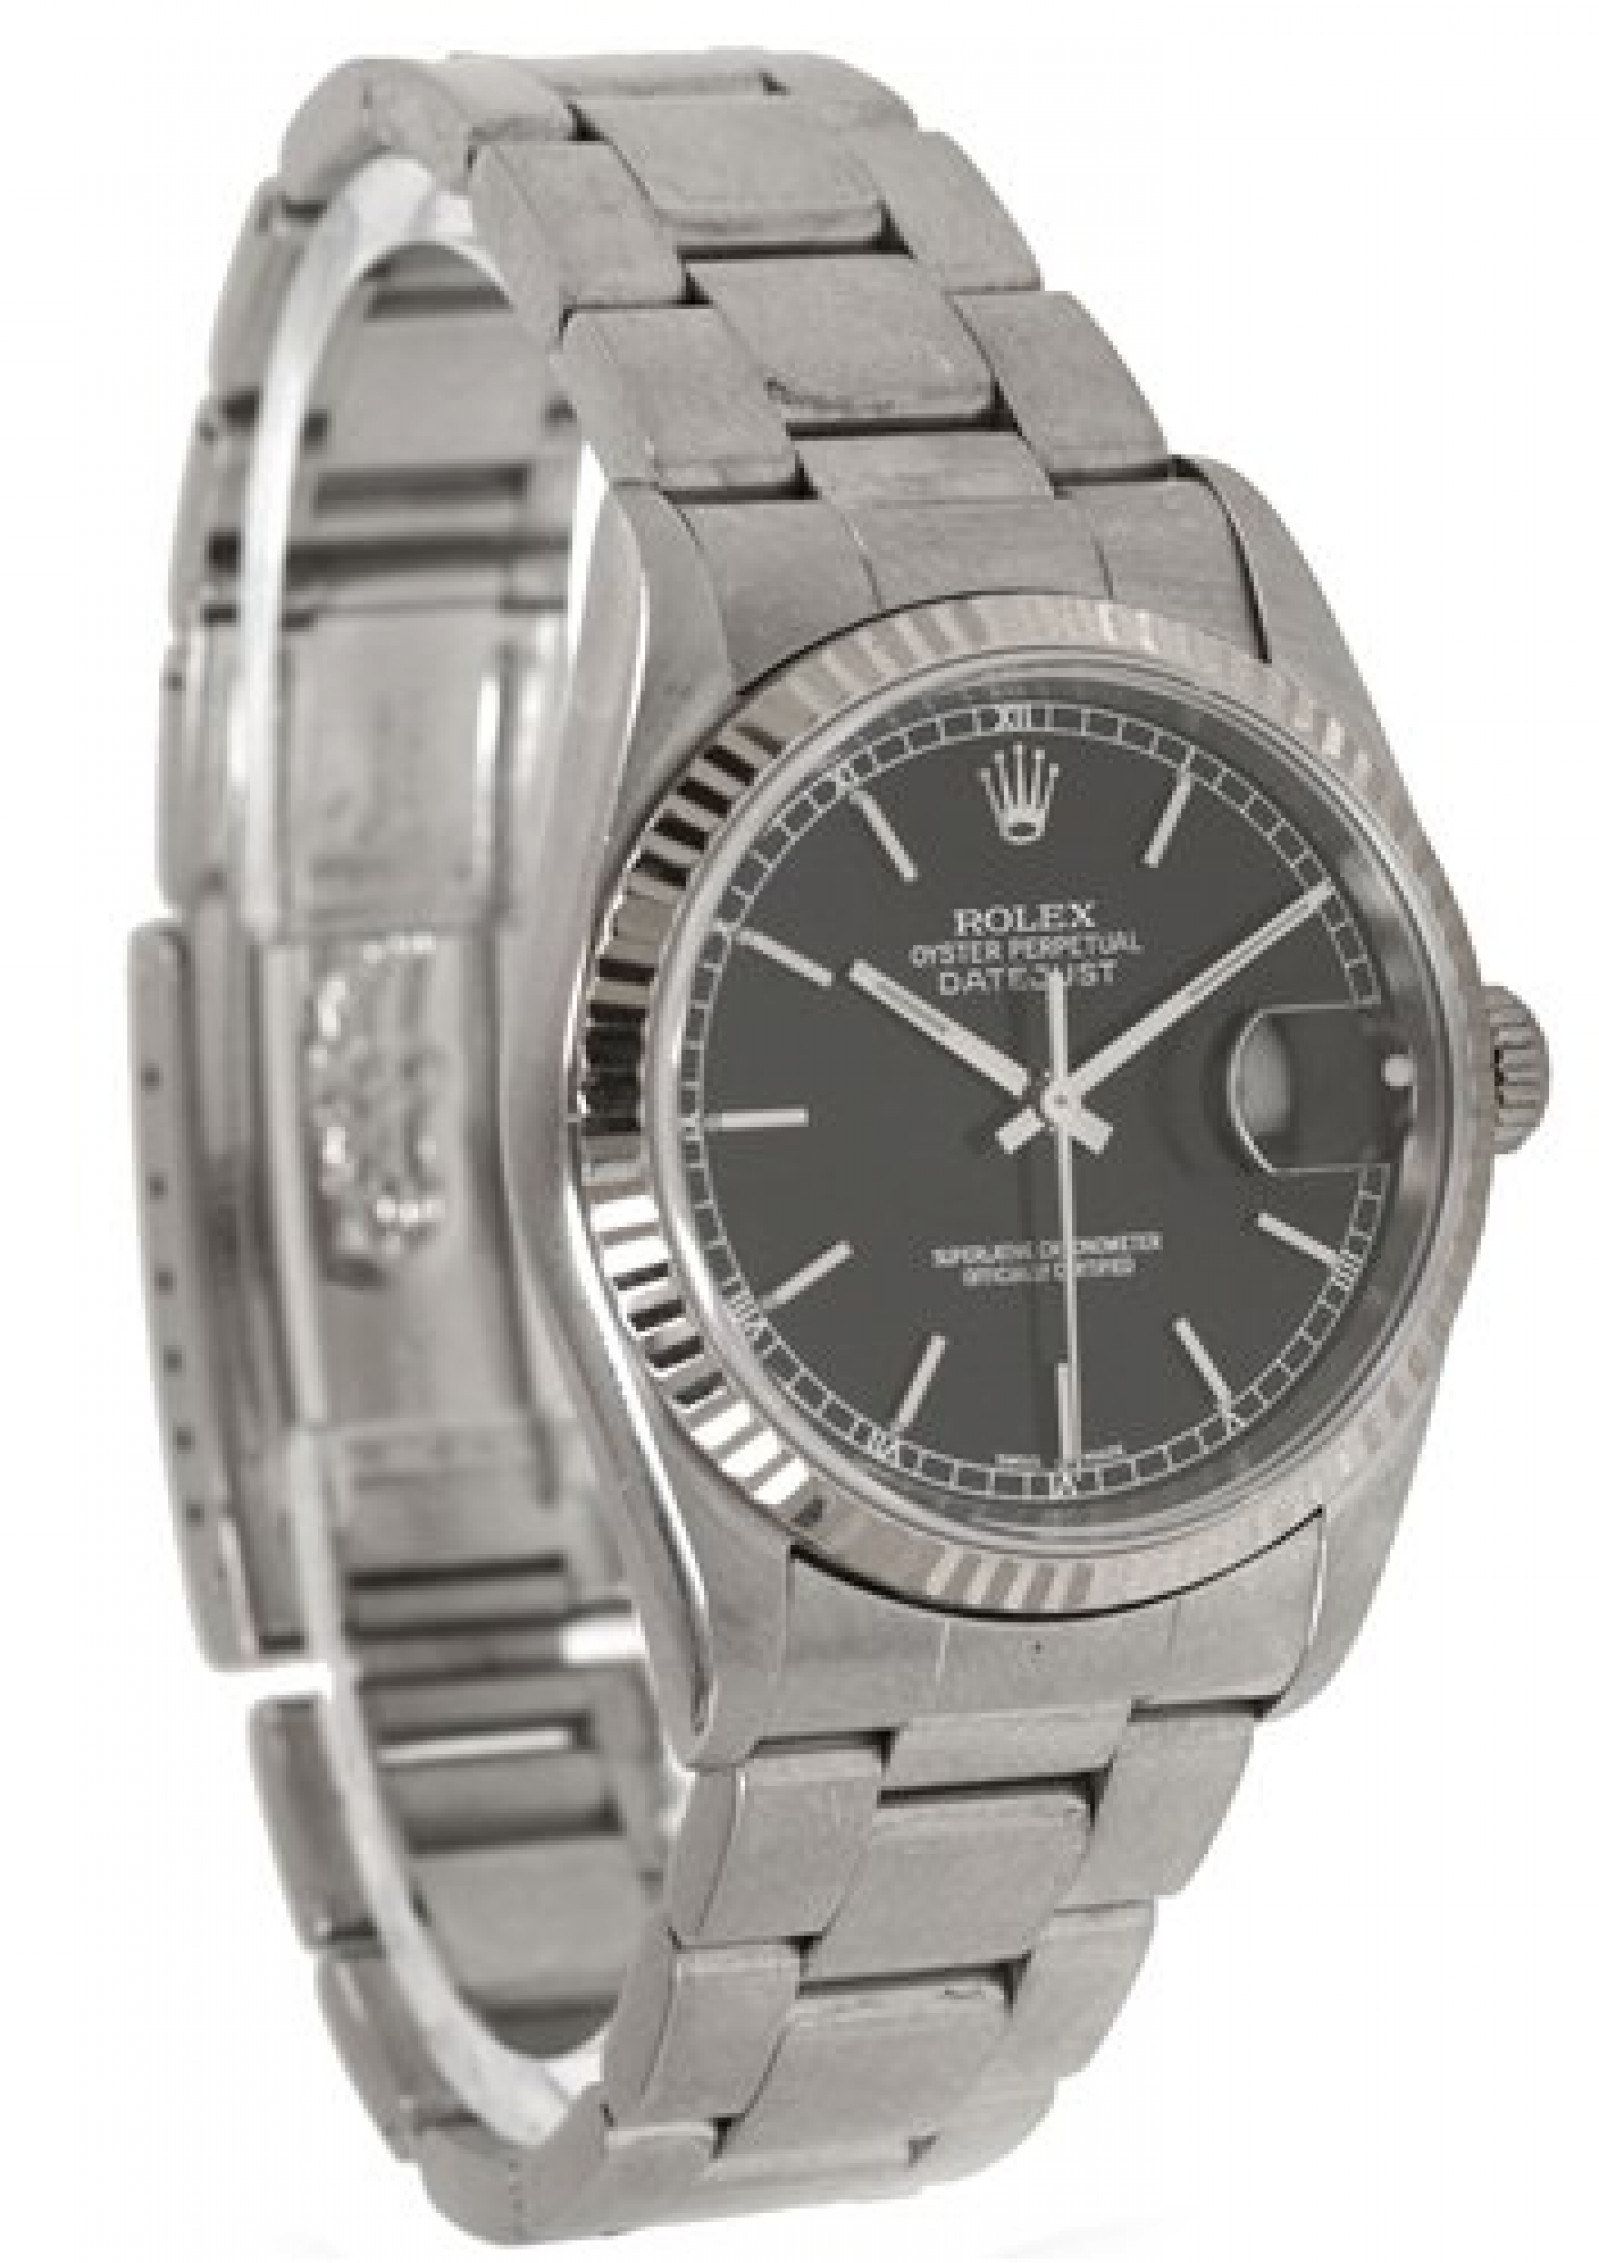 Rolex Datejust 16234 Steel with White Gold